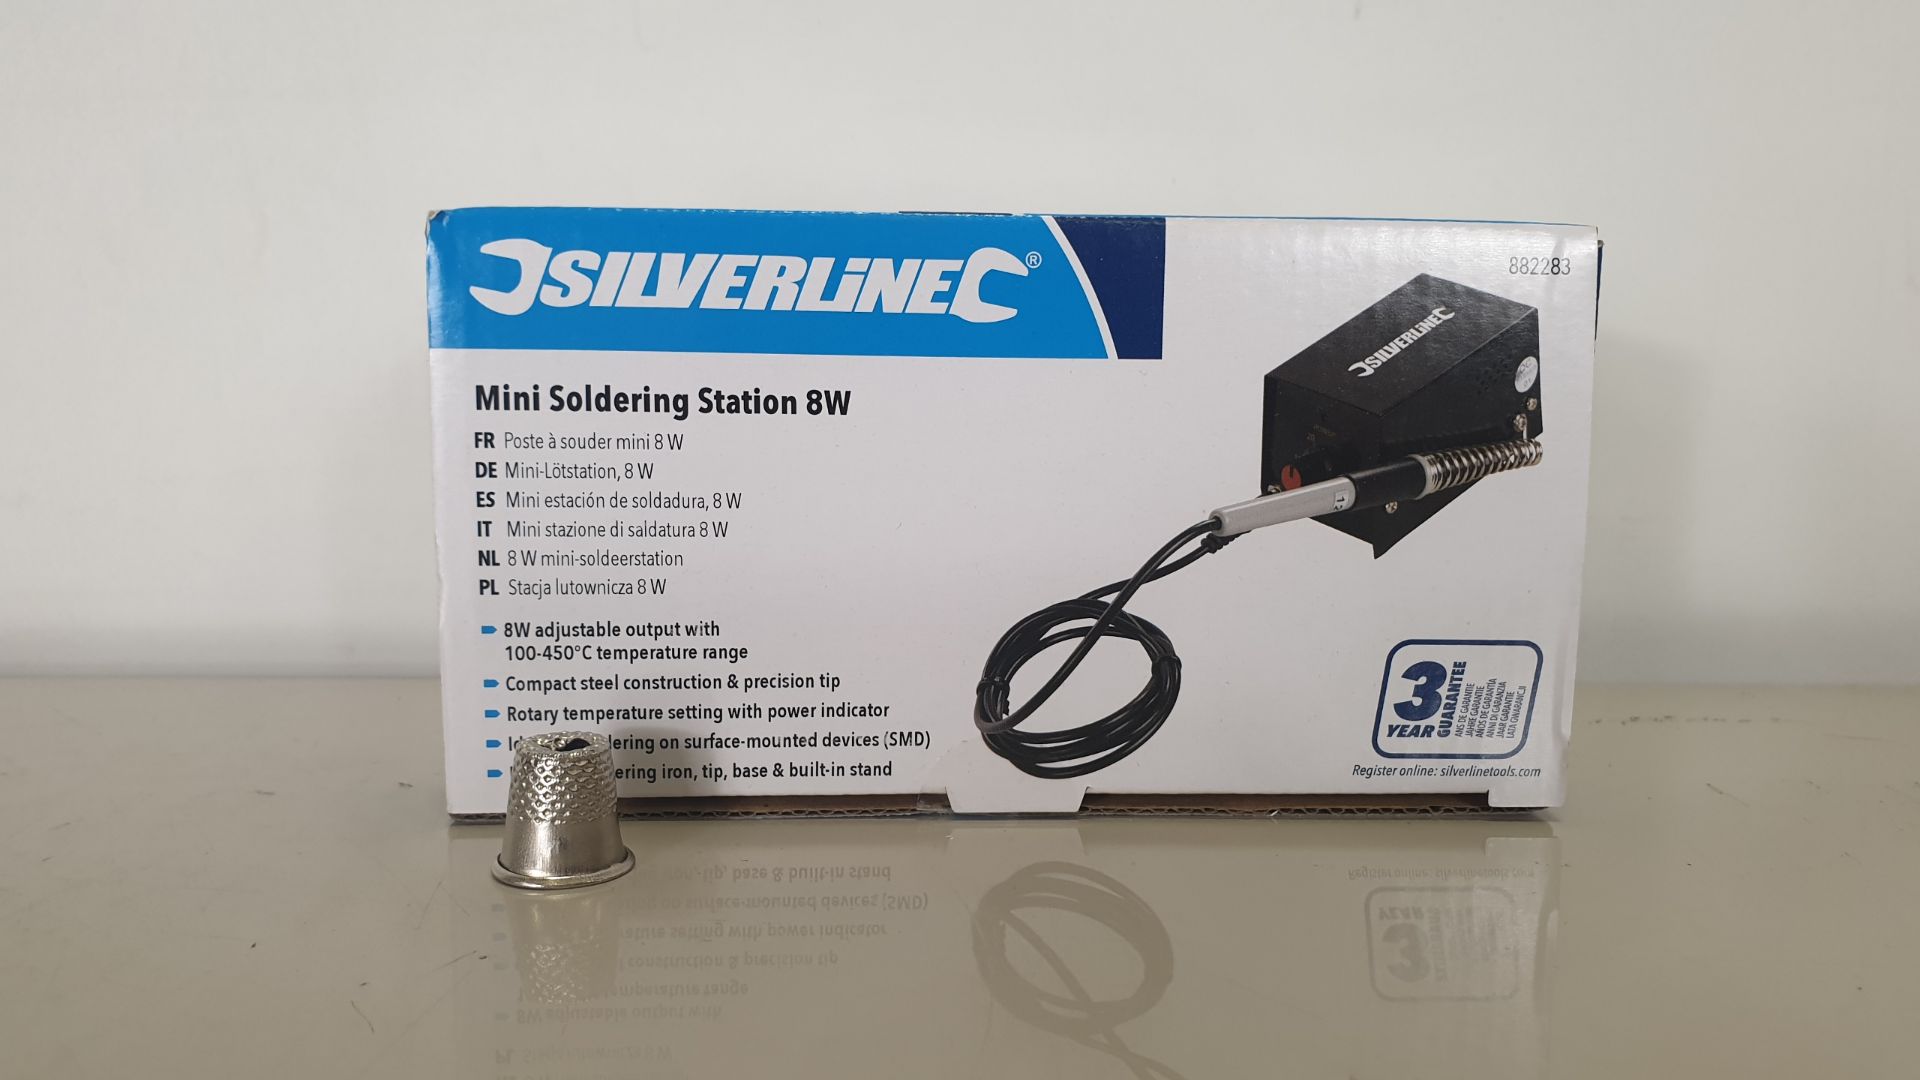 20 X BRAND NEW SILVERLINE MINI SOLDERING STATIONS 8W (PROD CODE 882283) - RRP £19.26 EACH (EXC